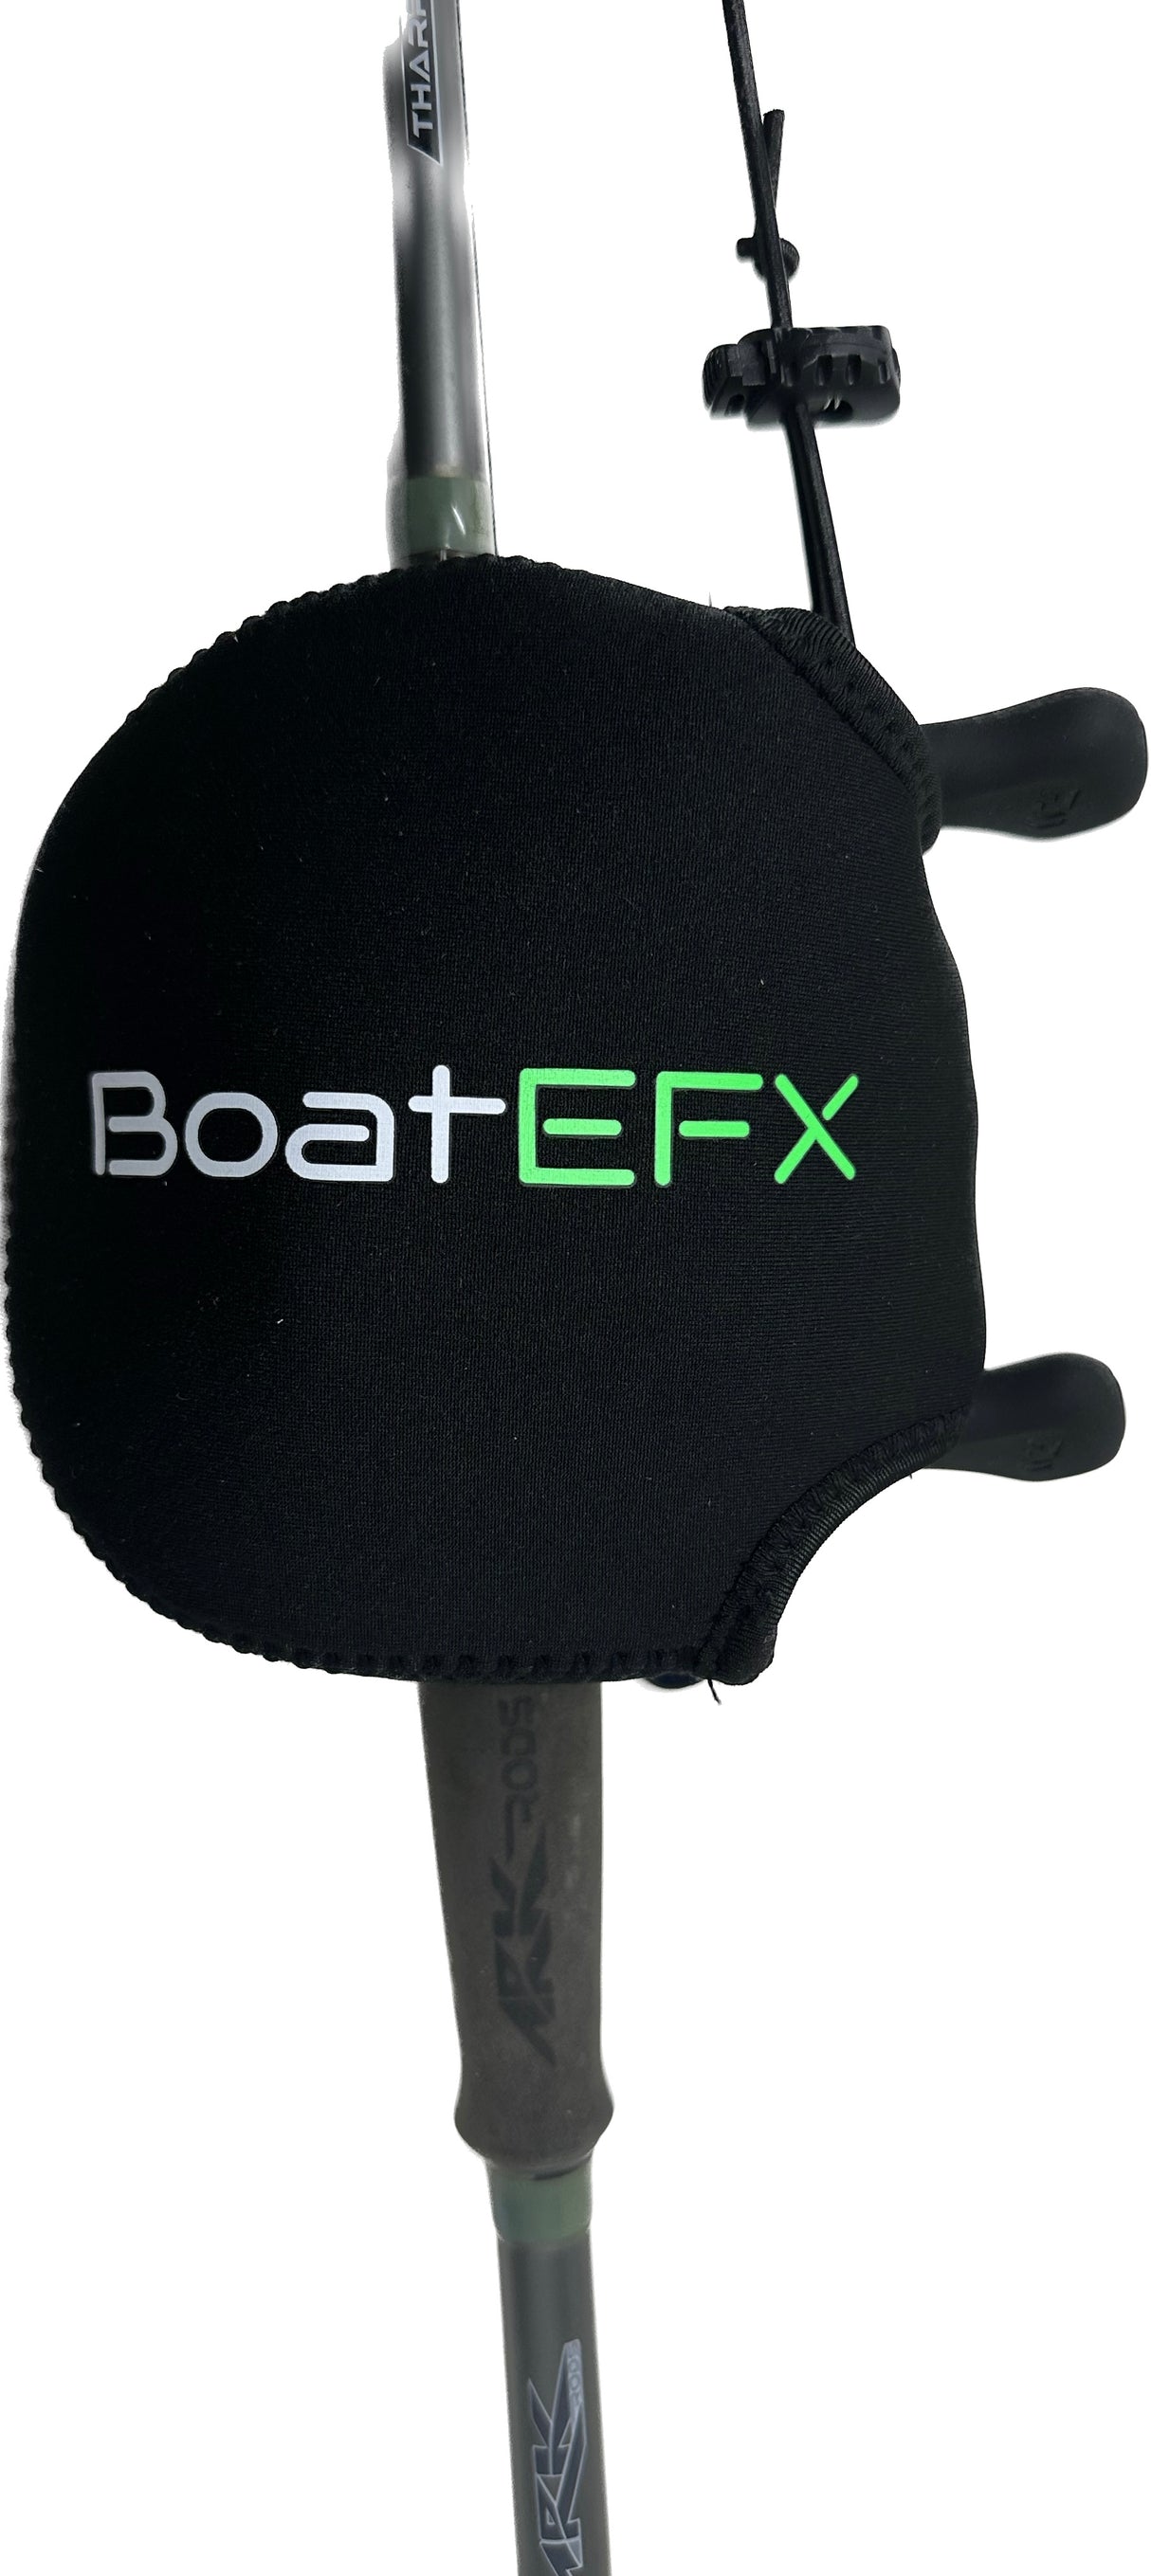 Reel Covers - BoatEFX